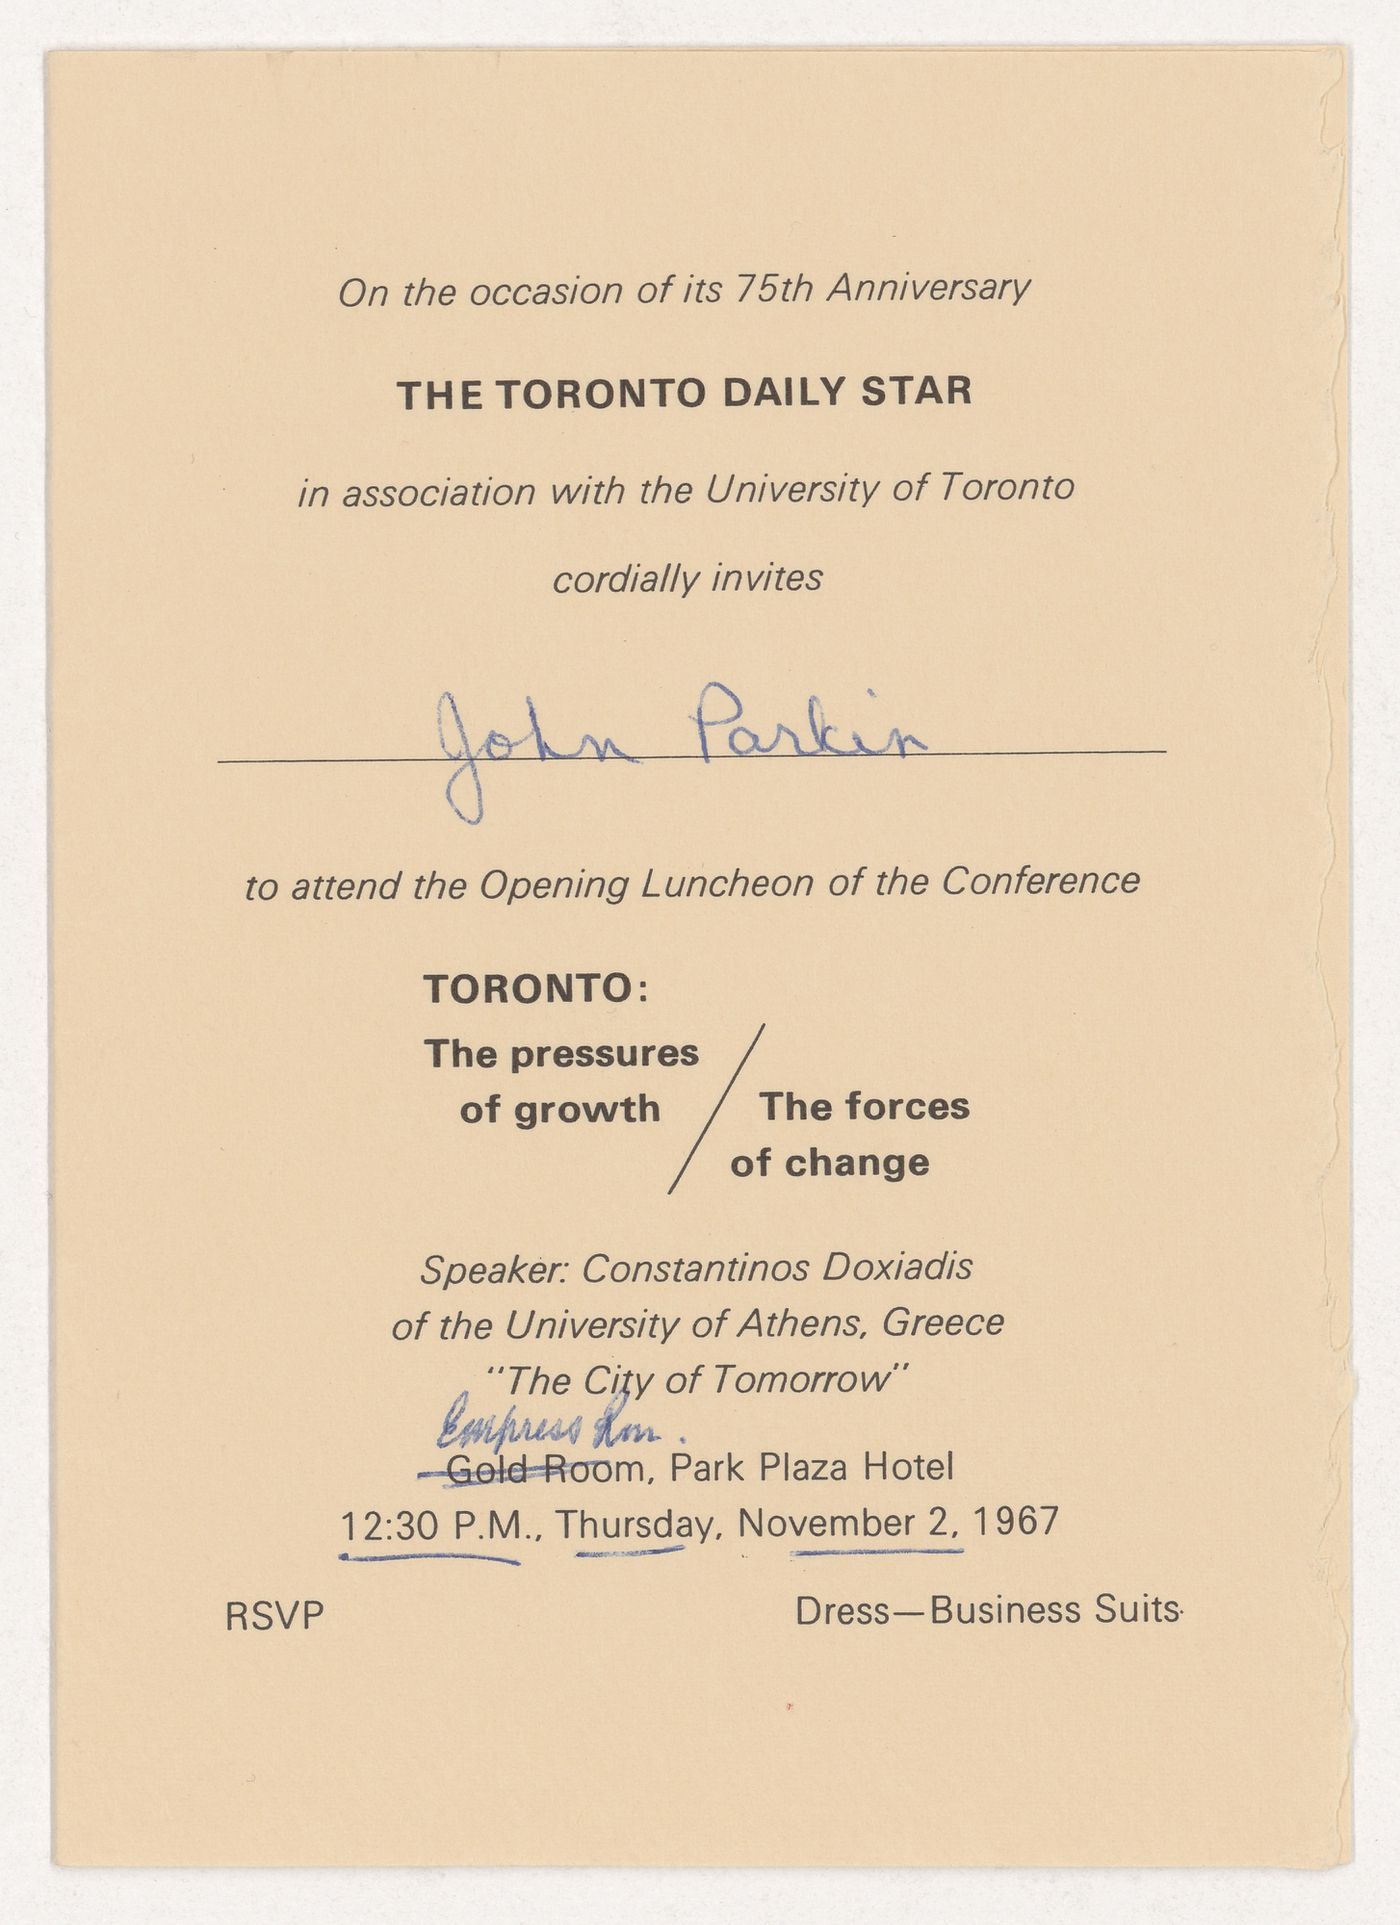 Invitation to the 75th anniversary of the Toronto Daily Star